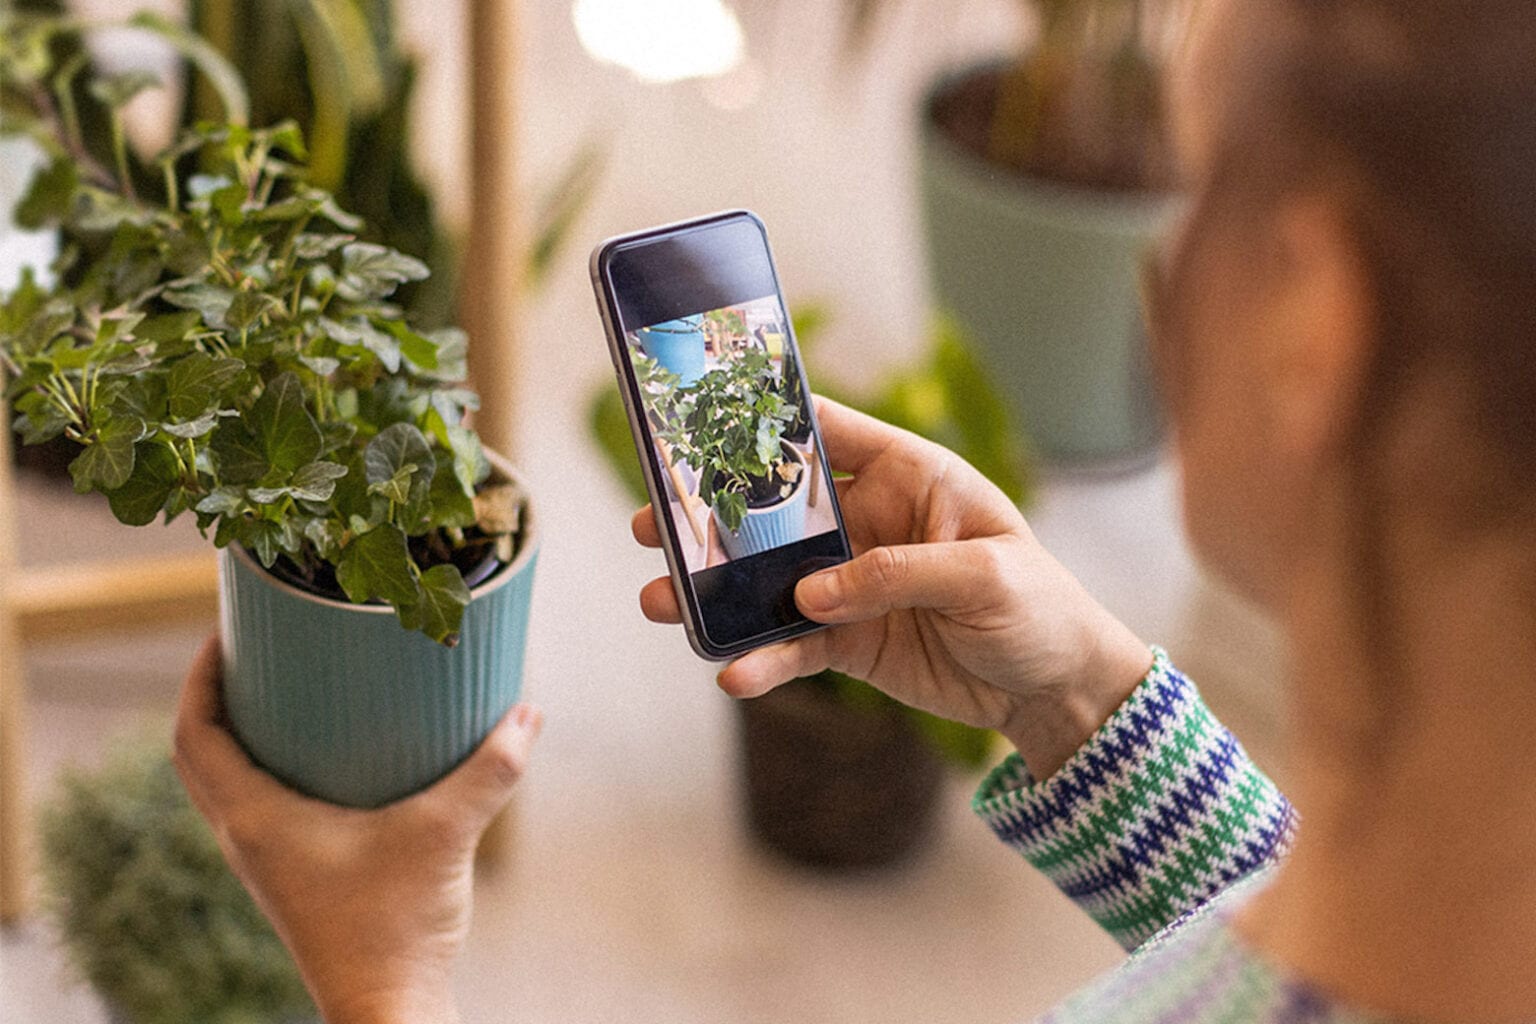 Care for your plants and ID unfamiliar ones with this discounted app.